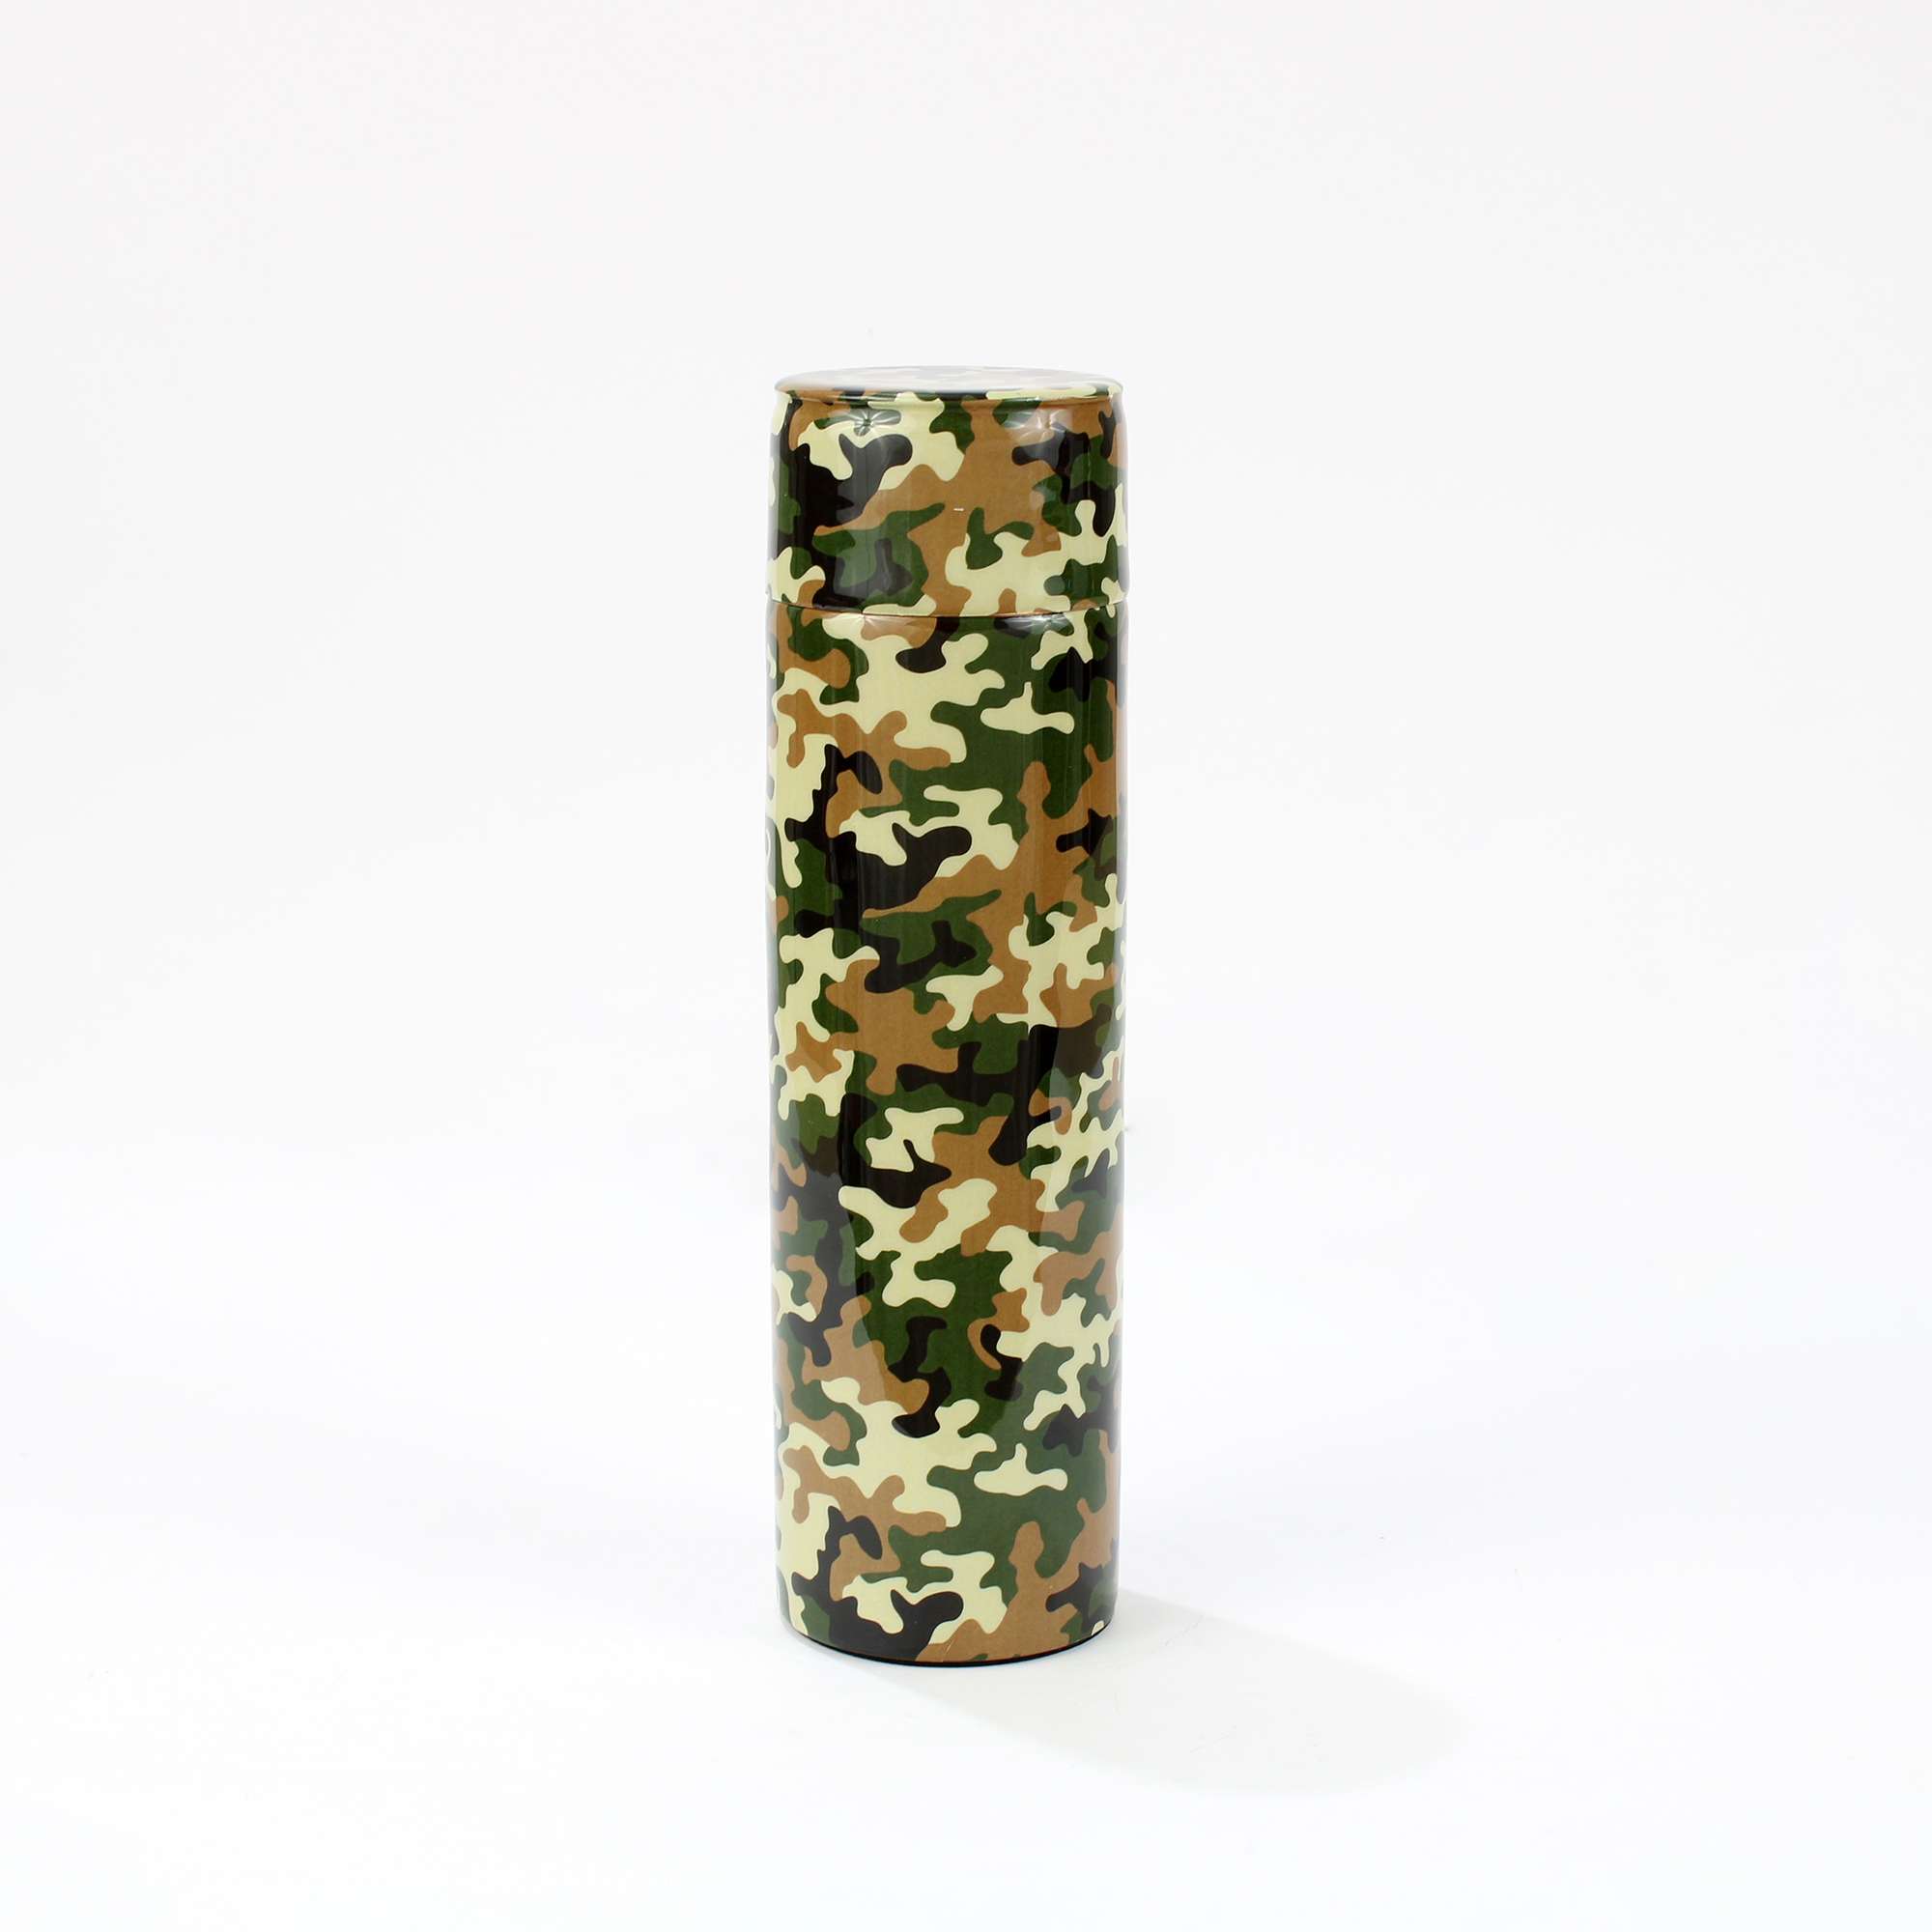 ELCOBRE PREMIUM LIMITED EDITION PRINTED COPPER BOTTLE - 500 ML (Camouflage)